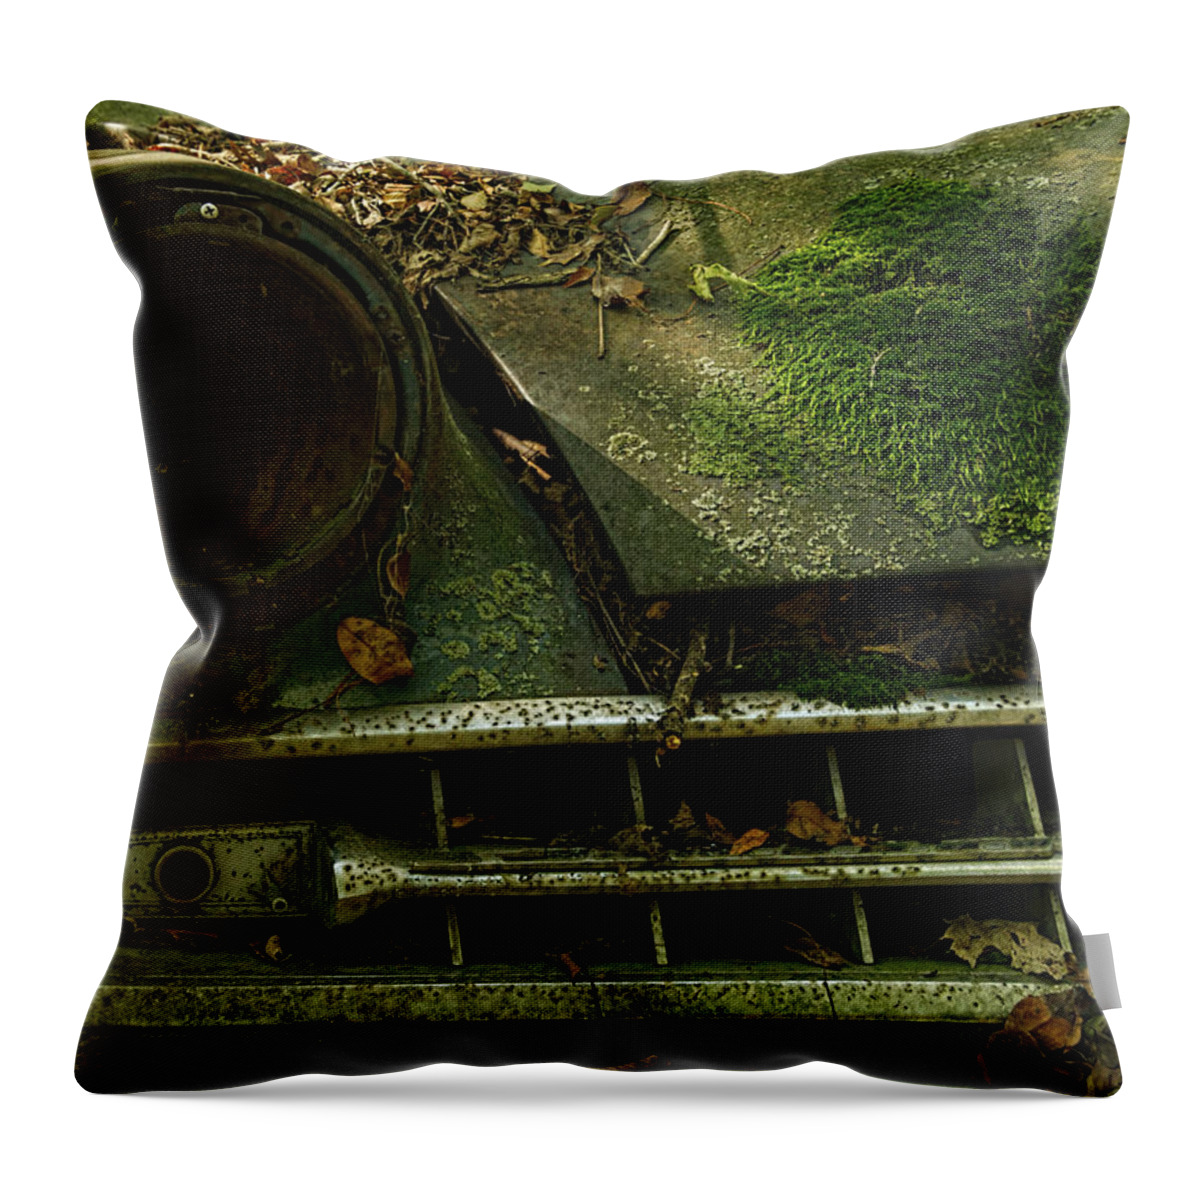 Studebaker Throw Pillow featuring the photograph Studebaker #5 by James Clinich